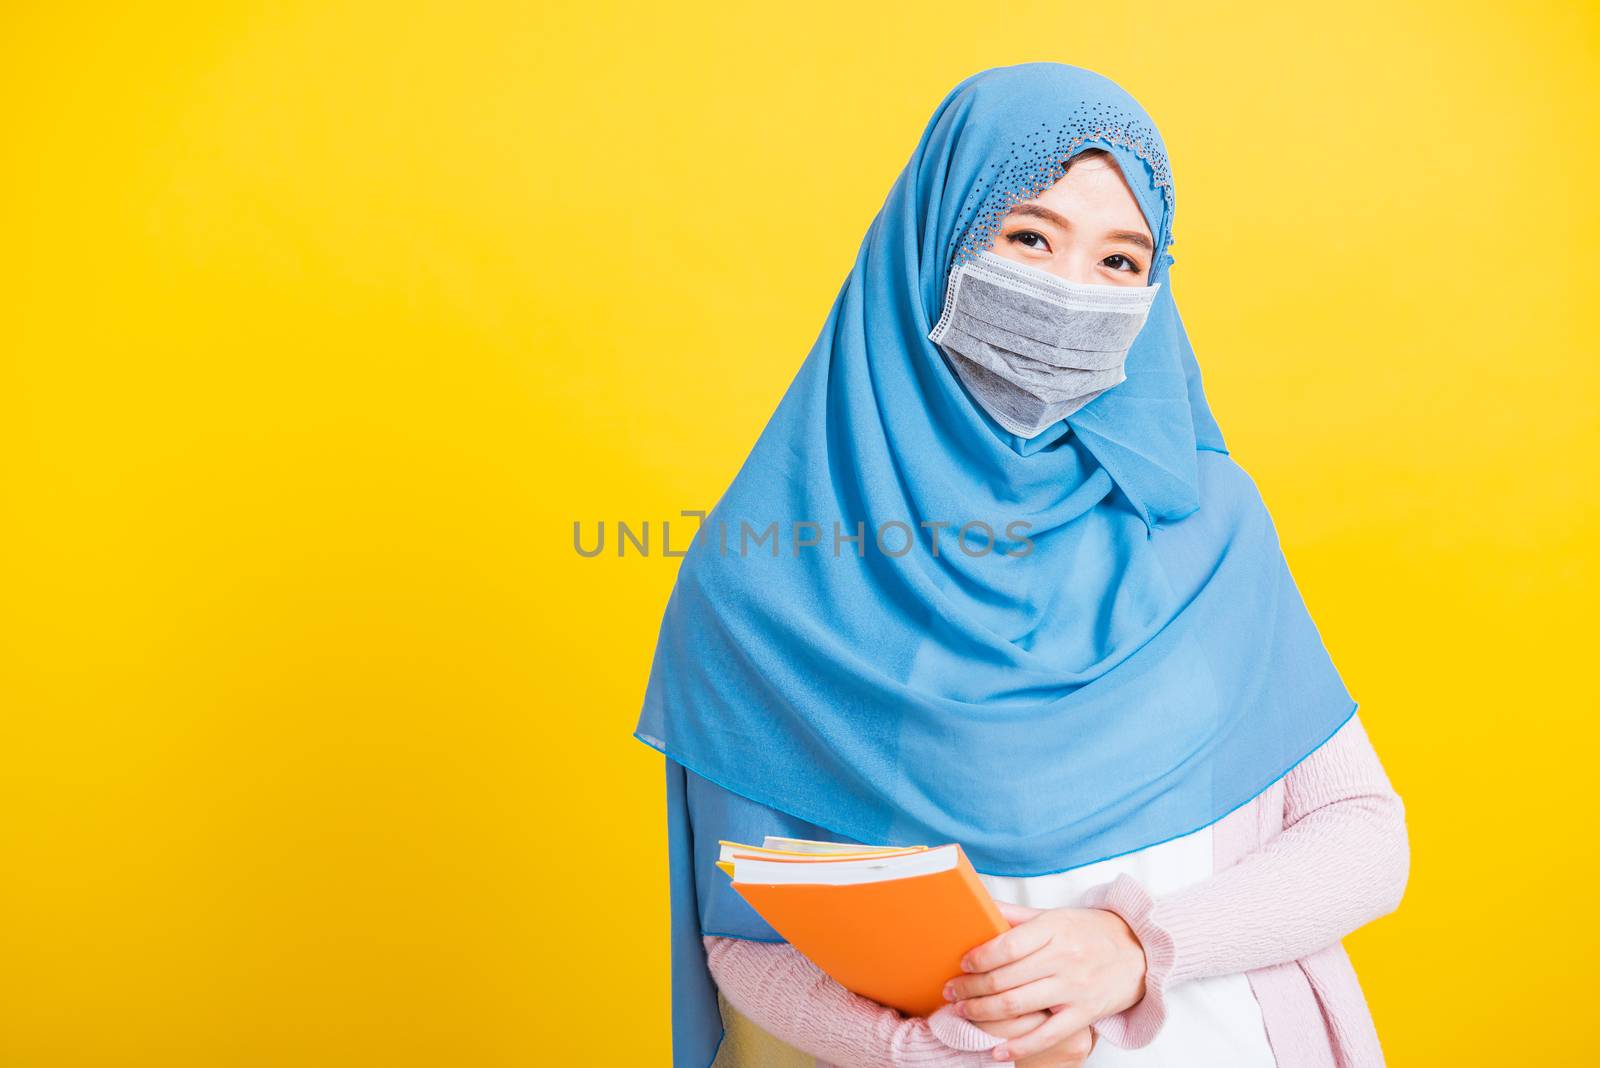 Asian Muslim Arab, Portrait of young woman religious wear veil hijab and face mask protective to prevent coronavirus she student hold books on hand, isolated on yellow background, Back to college